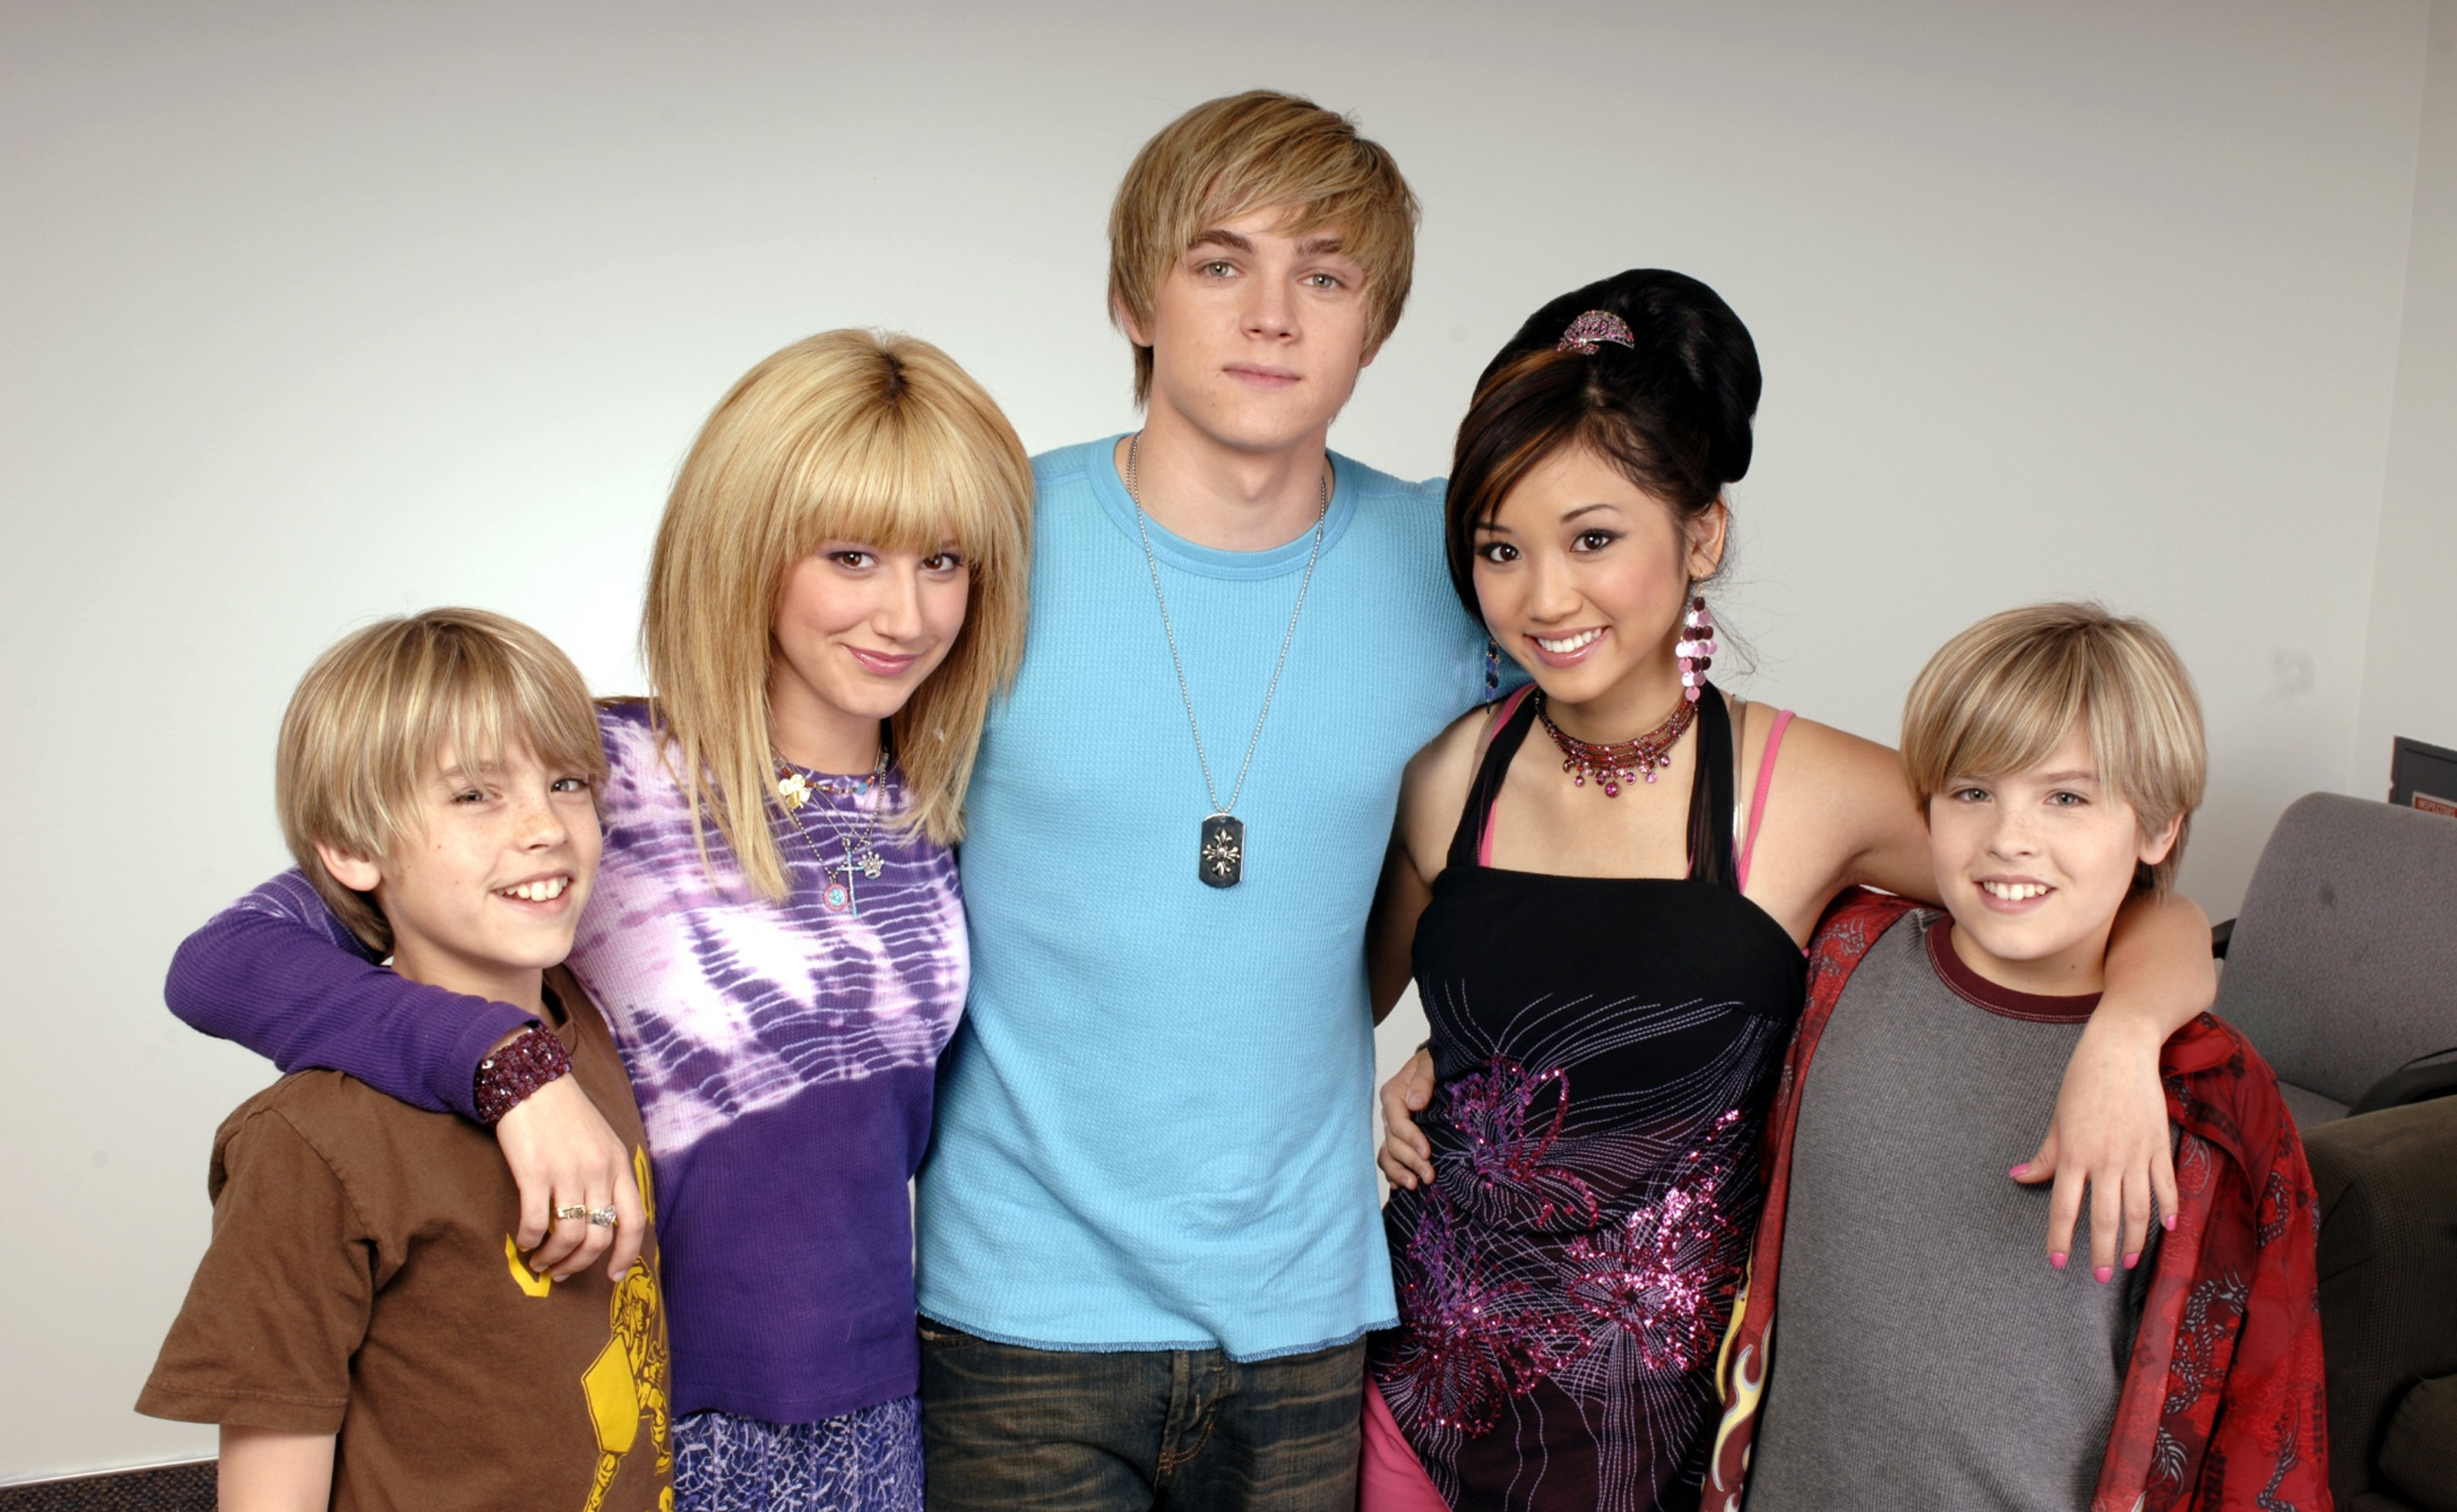 Jesse McCartney in The Suite Life of Zack and Cody, episode: Rock Star In The House